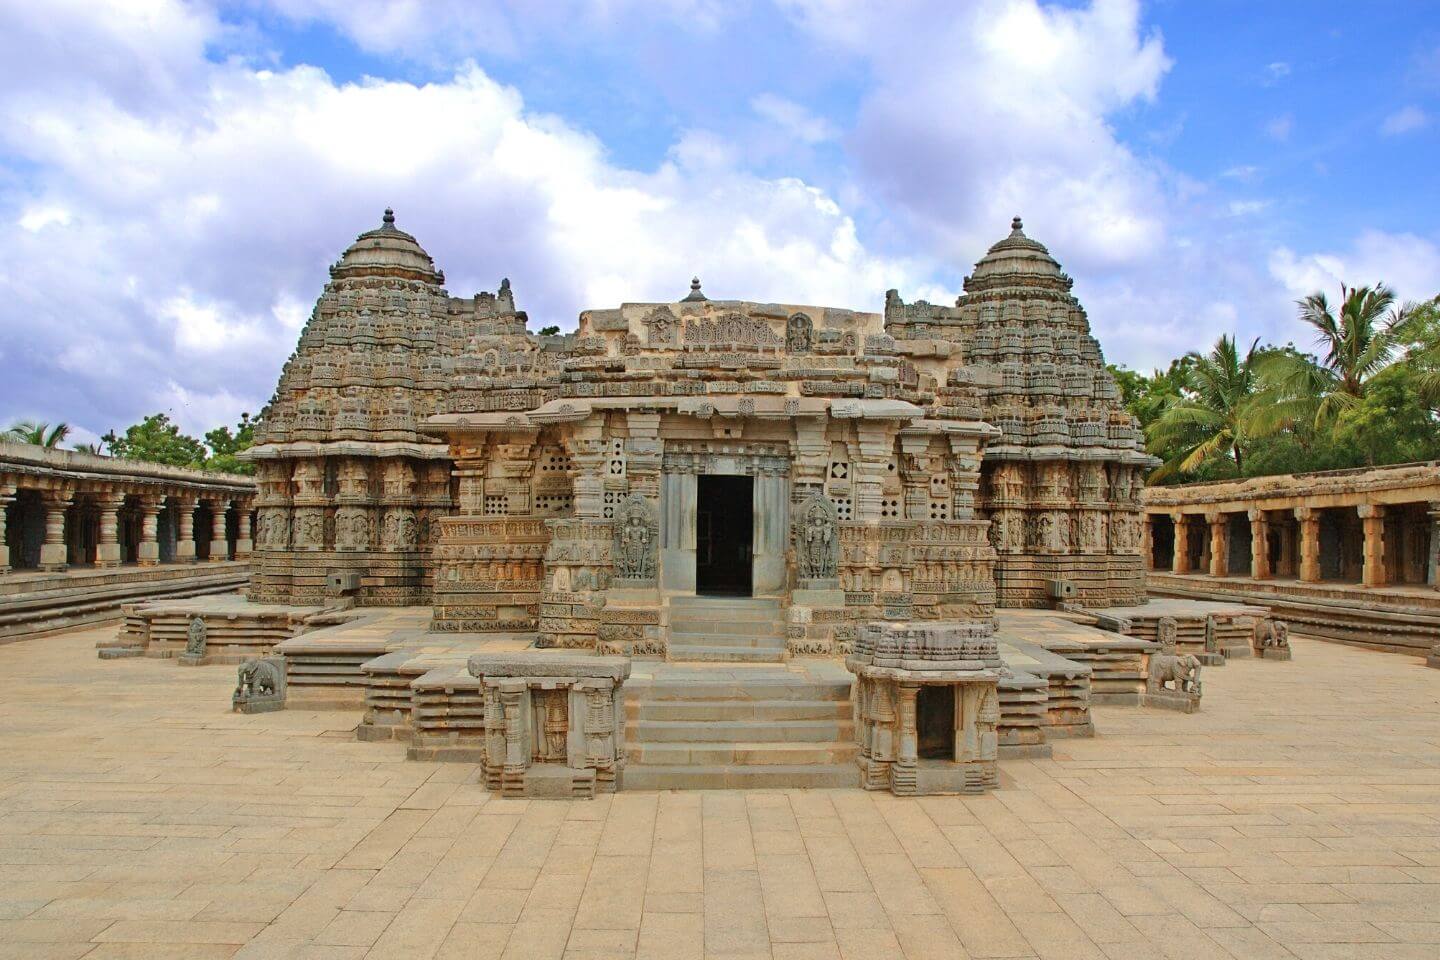 Somnathpur has many amazing temples to visit along with family and kids near Bangalore within 200 km